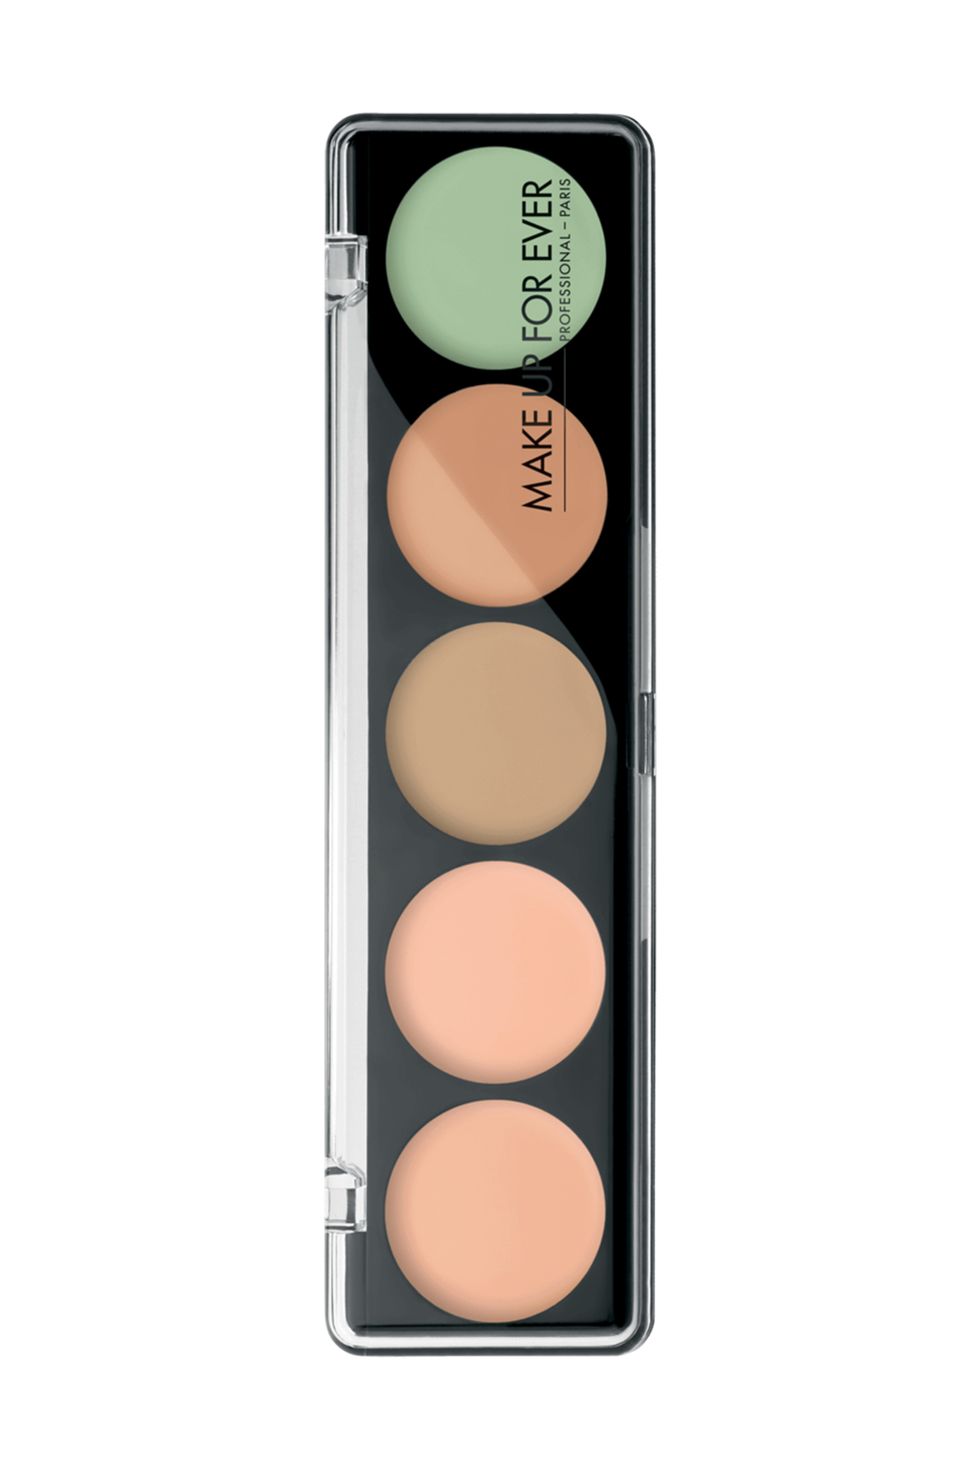 7 Concealer Palettes To Camouflage